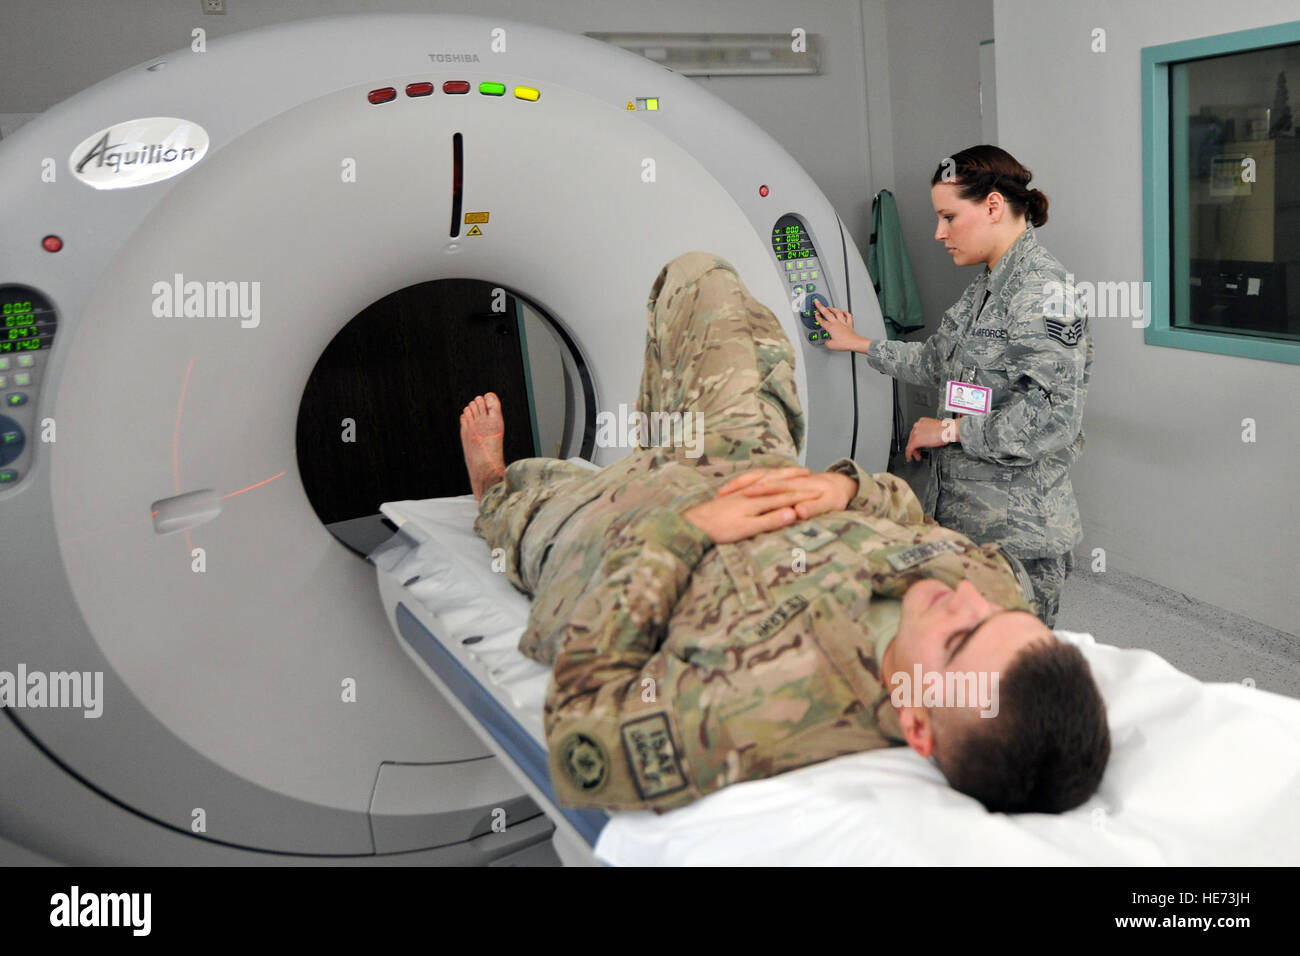 U.S. Army Sgt. Karl Berlinger has a computerized tomography scan done on his right foot with assistance (from) Staff Sgt. Brandy Bisson, diagnostic imagery CAT scan technician, Feb. 12, 2014, Landstuhl Regional Hospital, Germany. Berlinger and his unit were on their way back to Kandahar Airfield, Afghanistan, after a perimeter patrol when they got hit by an improvised explosive device, which blasted the vehicles door inward slamming across Berlinger's right foot. (U.S. Force photo/Senior Airman Chris Willis) Stock Photo